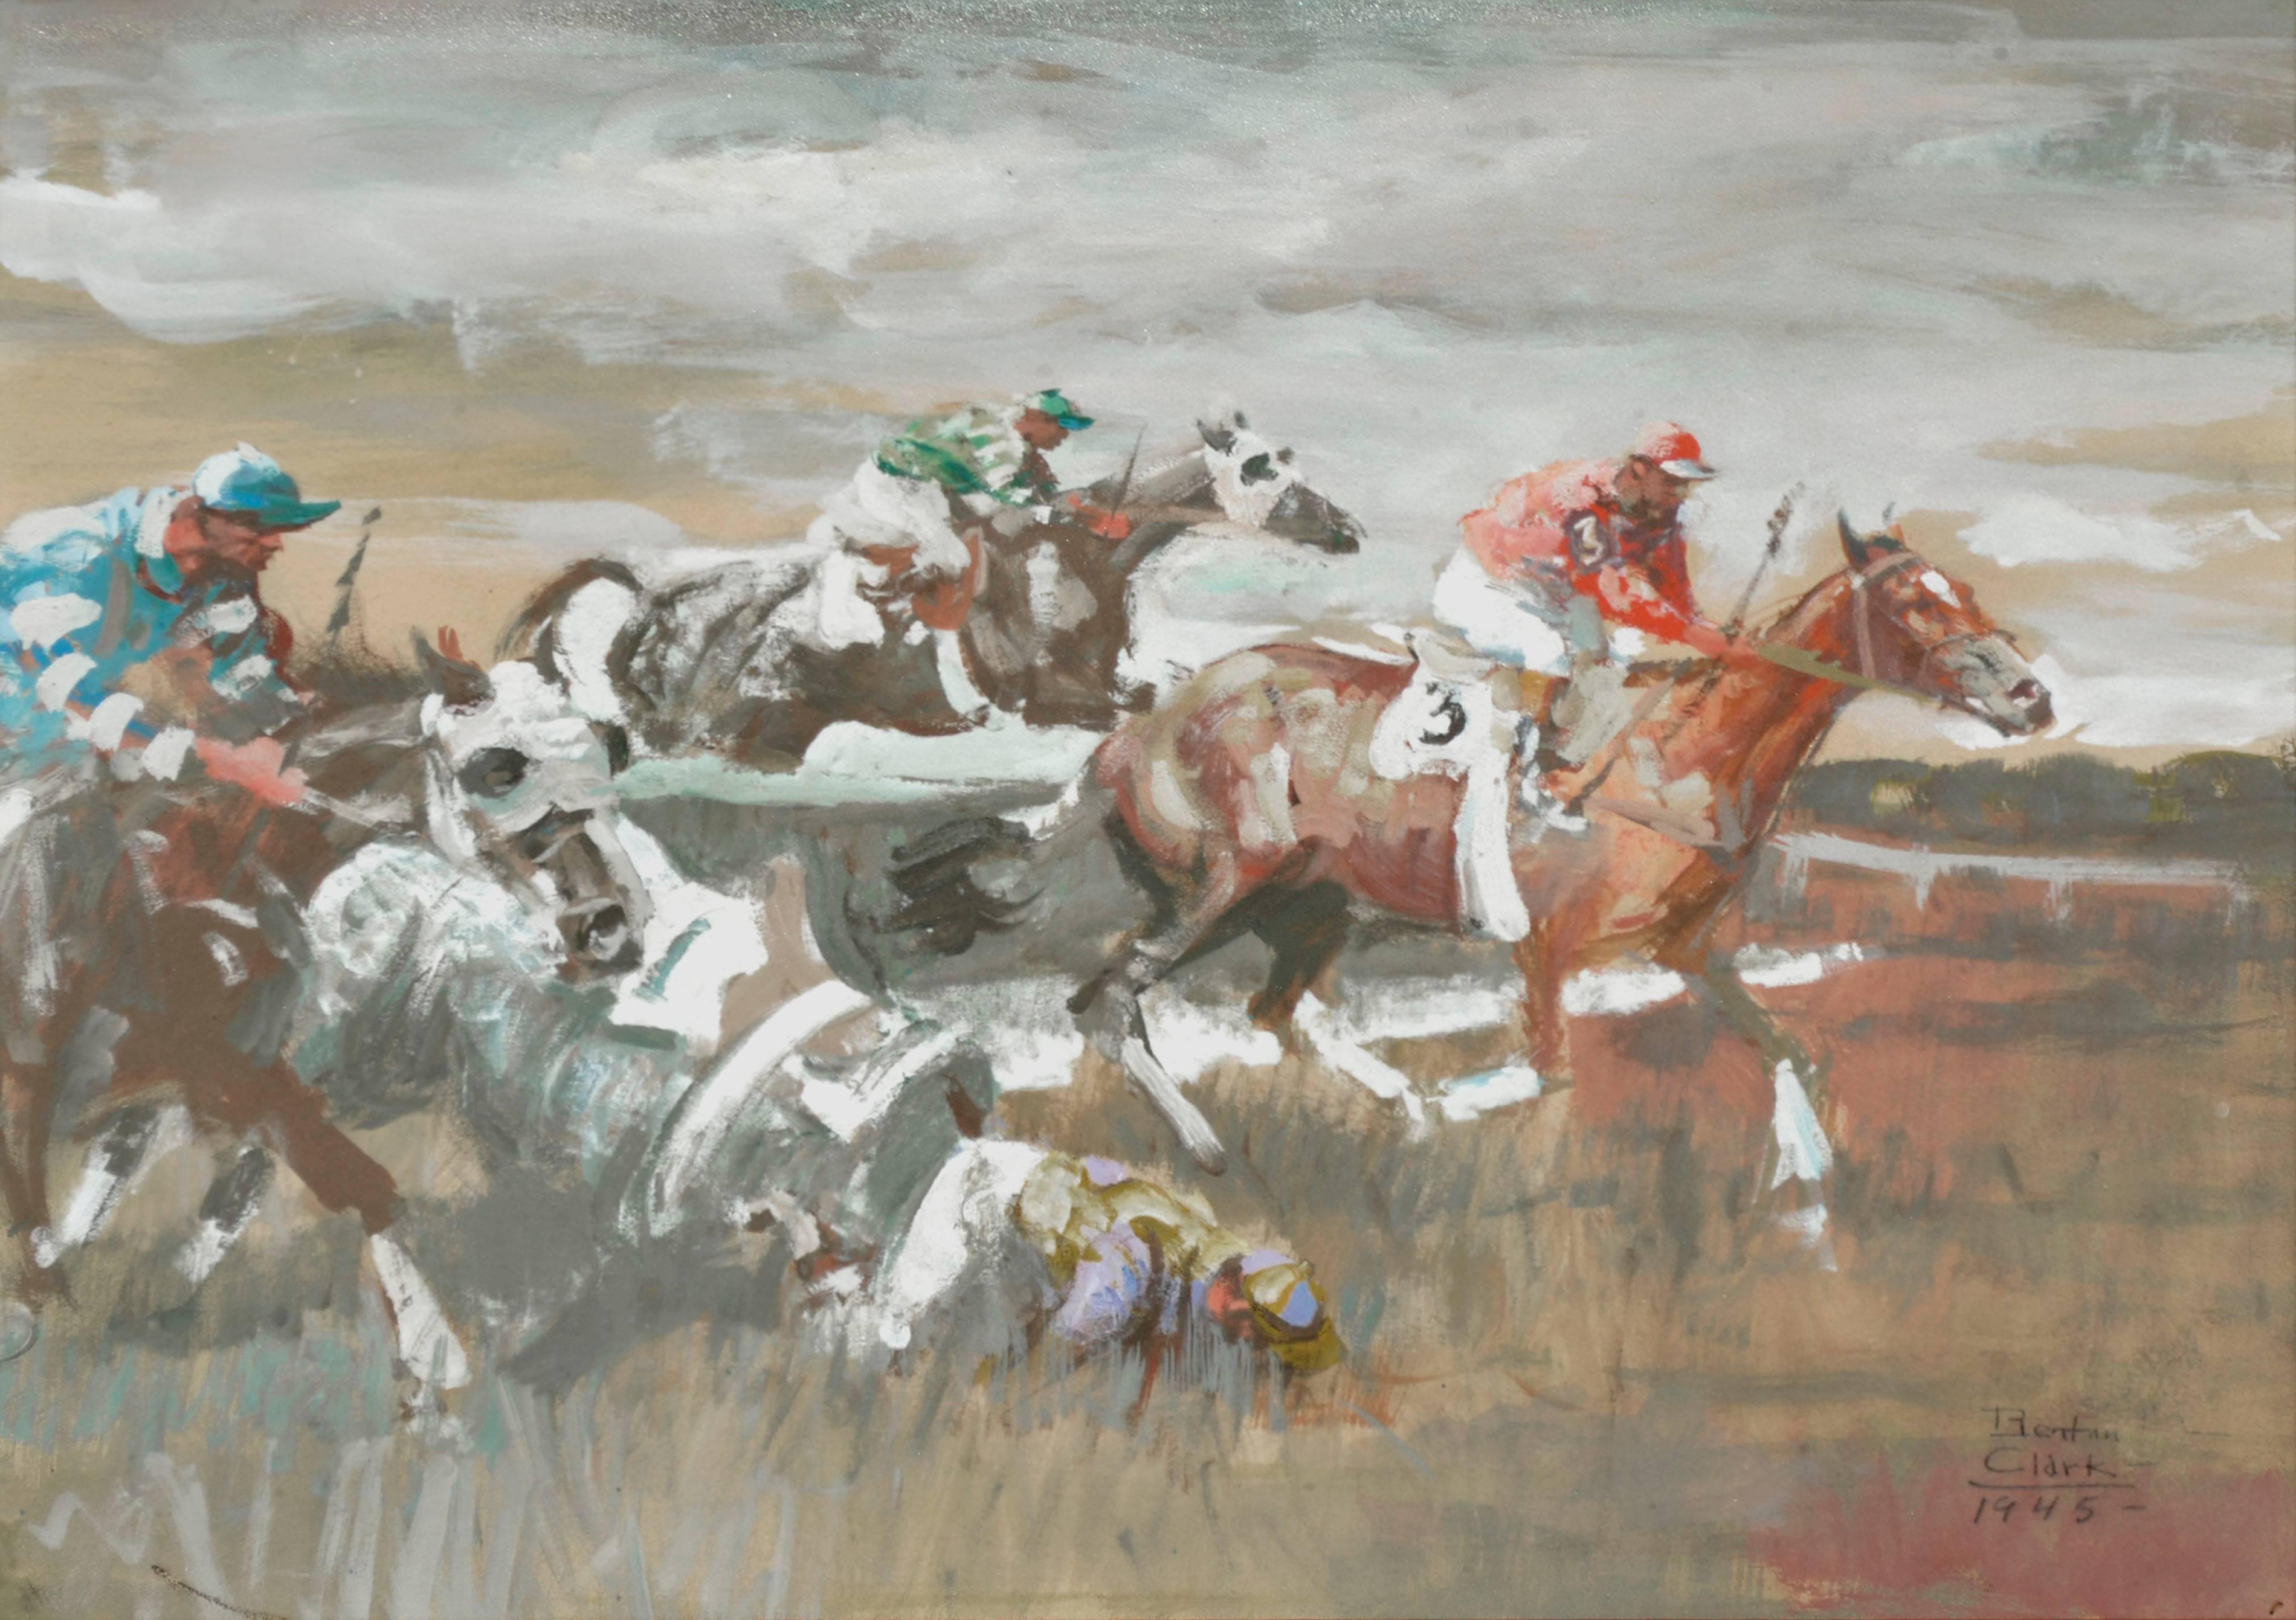 The Steeple Chase figurative - Painting by Benton Clark